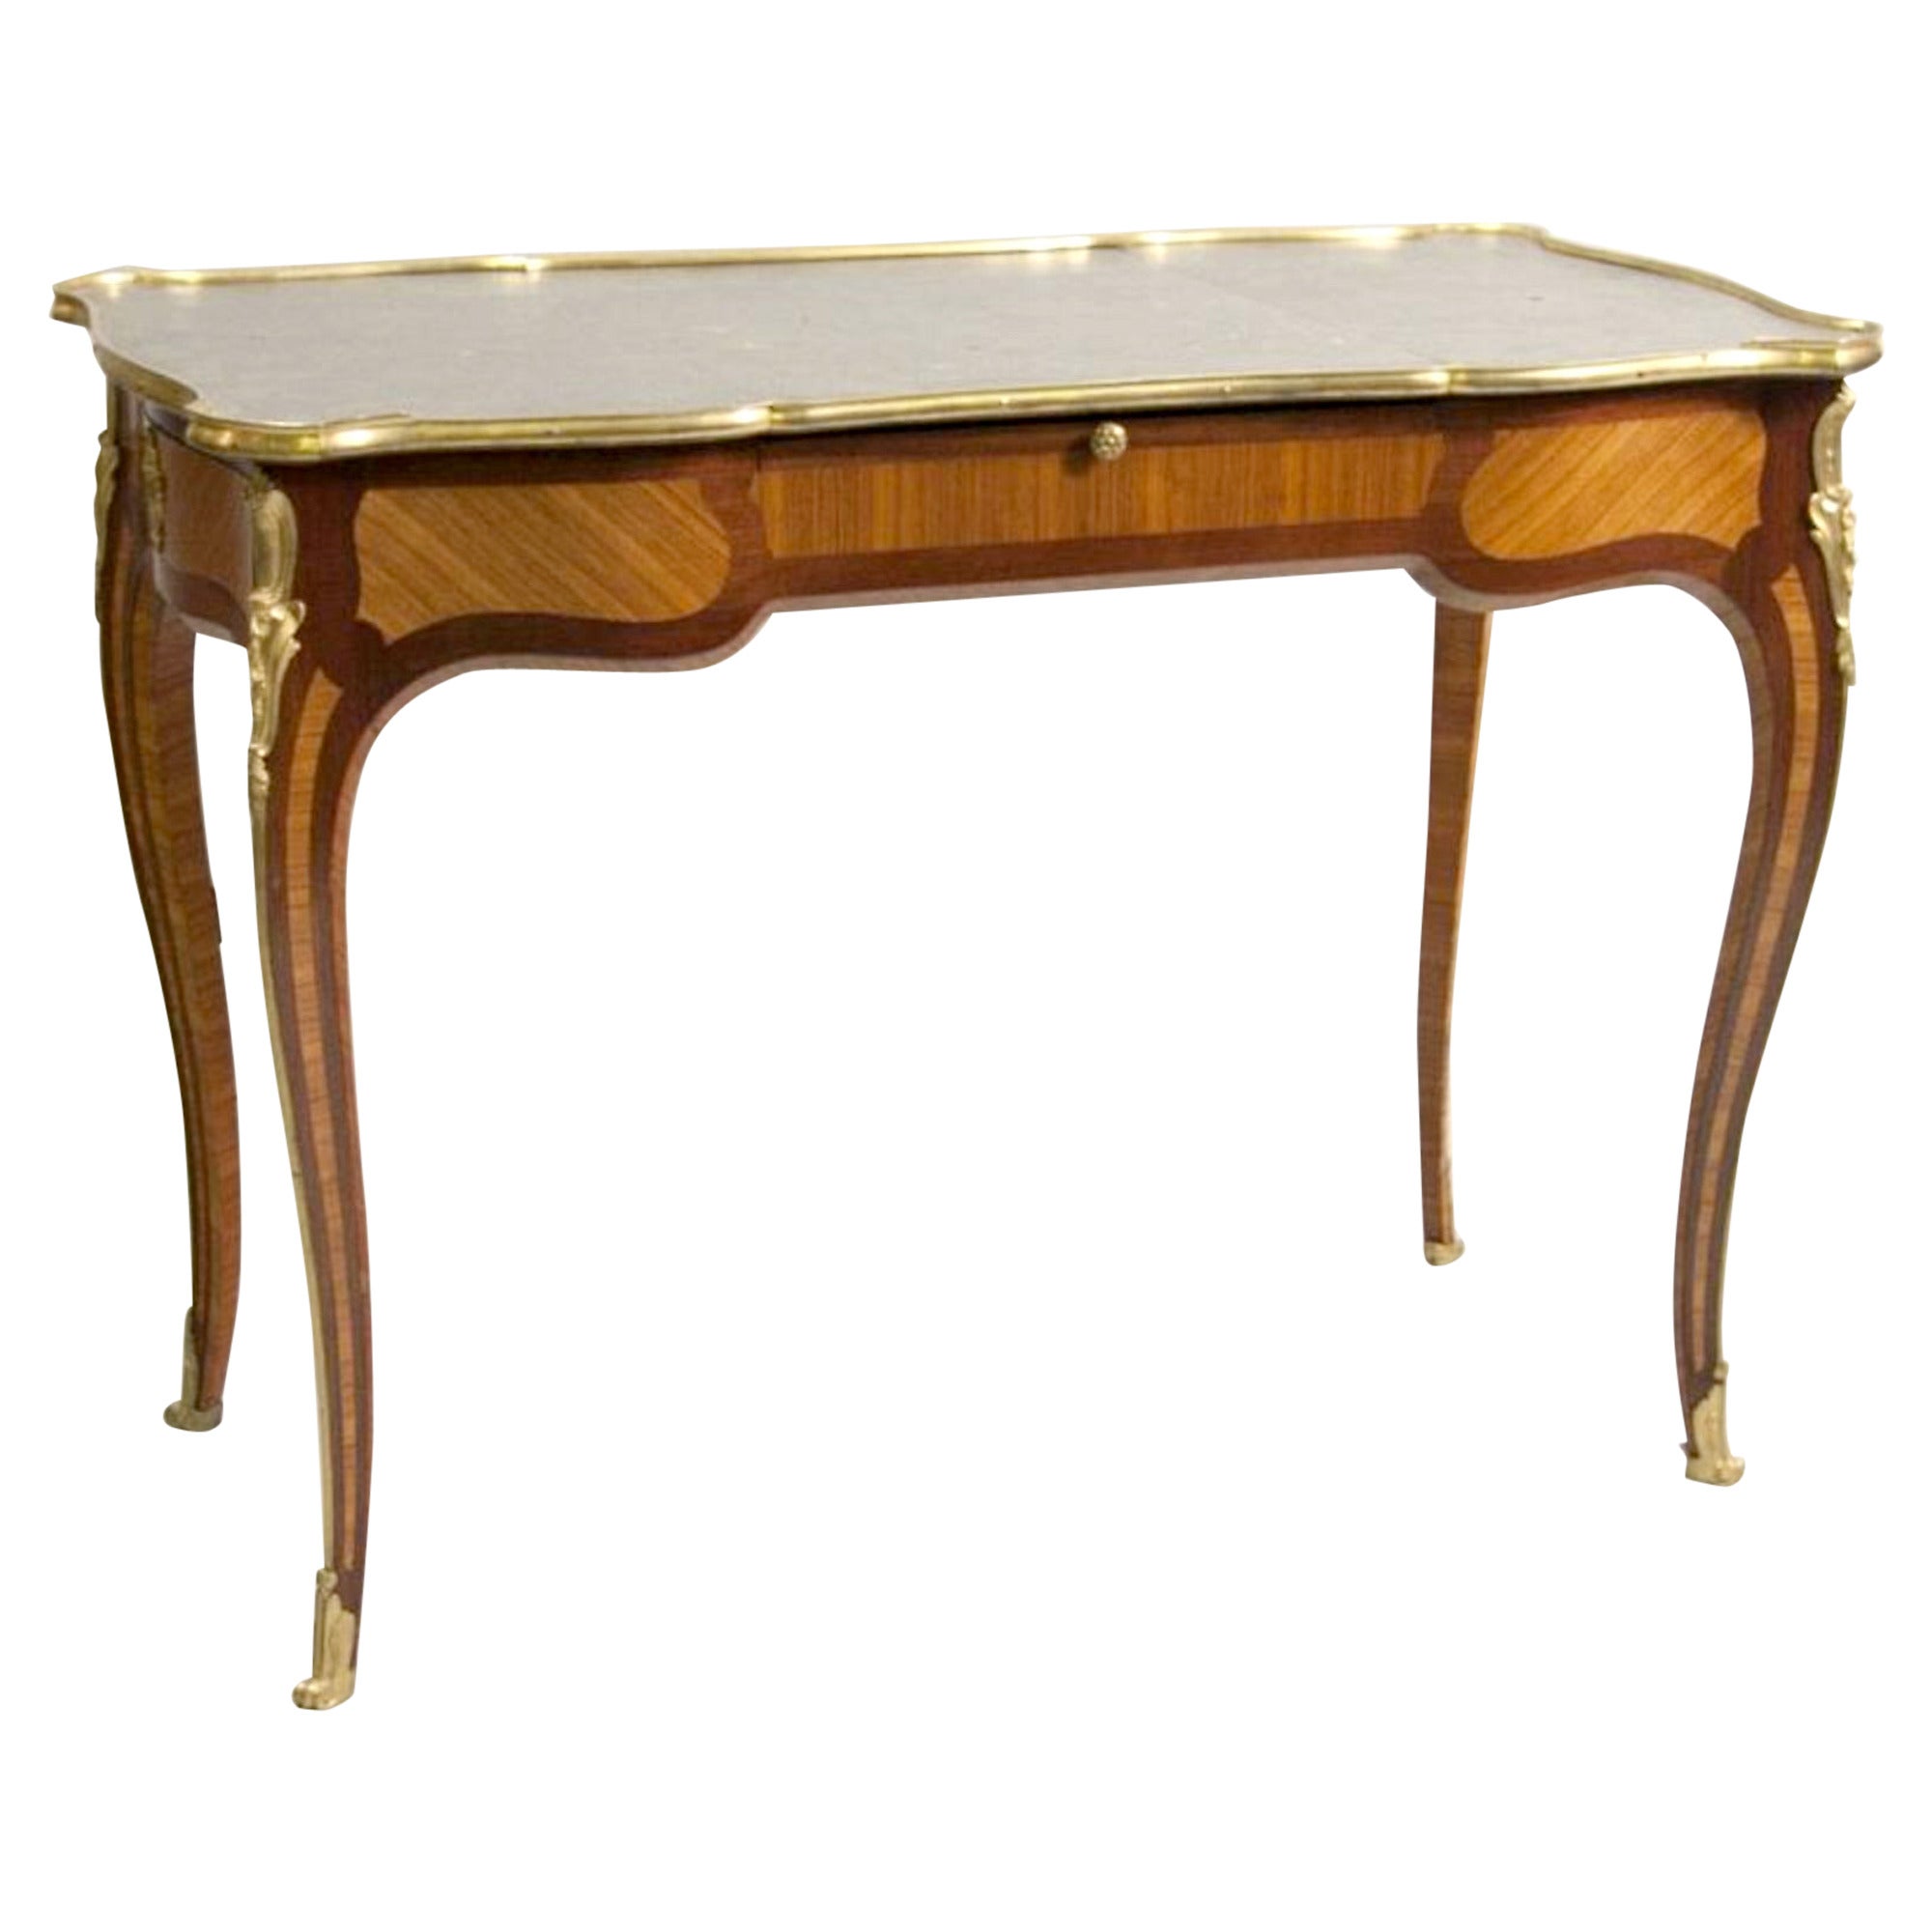 Important Ormolu-Mounted Louis XV Style Desk Stamped Beurdelay